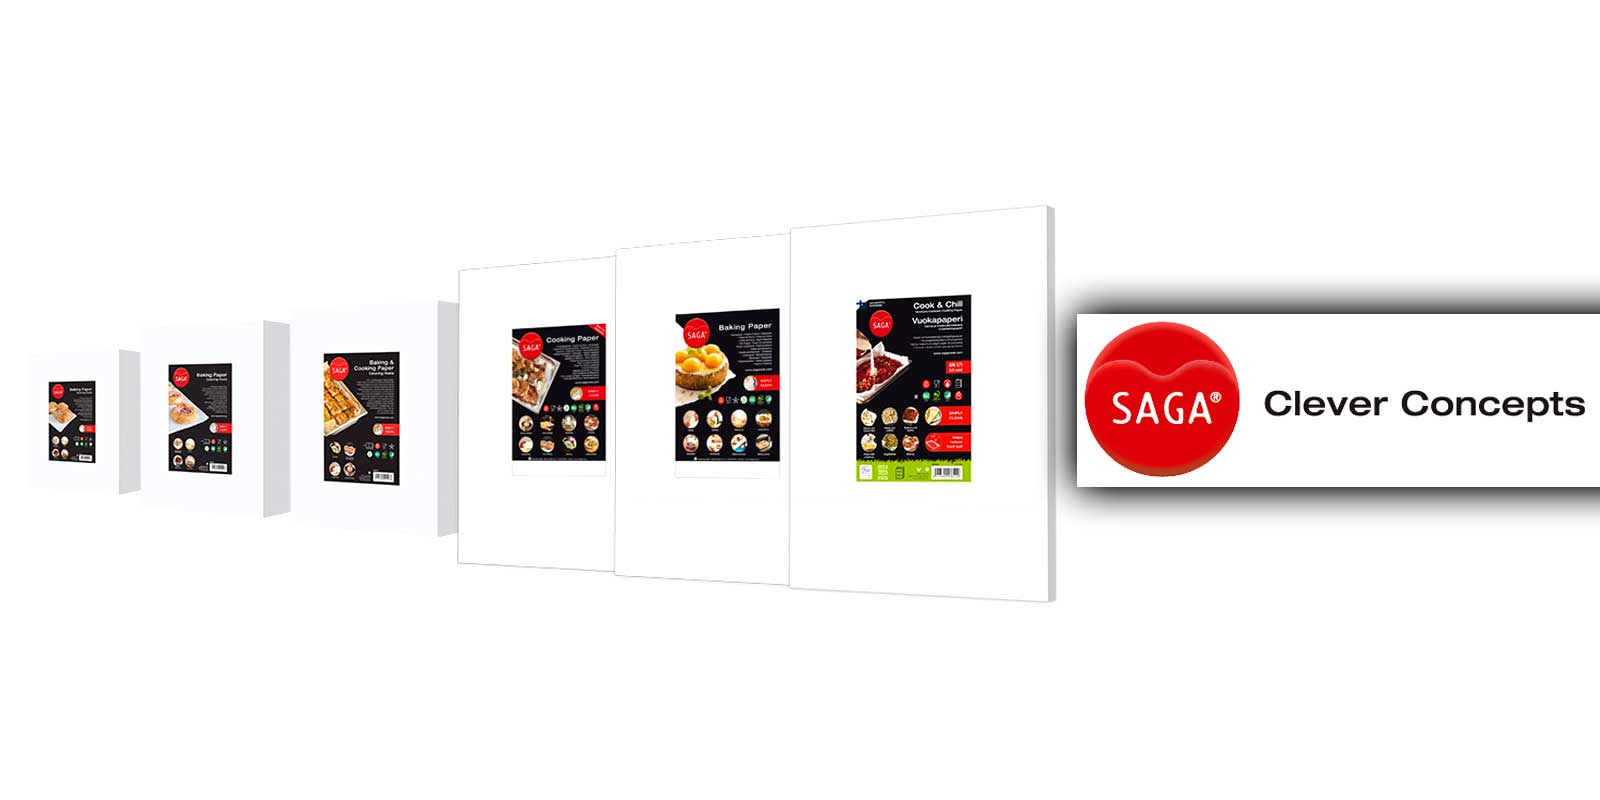 Saga products, cooking parchment, baking paper and foil SAGA cooking parchment represents all the beautiful little things we experience when preparing and enjoying a good meal. Our range includes inspiring multi-purpose products for people who want to prepare tastier and healthier food more creatively, easily and cost-effectively than ever before.